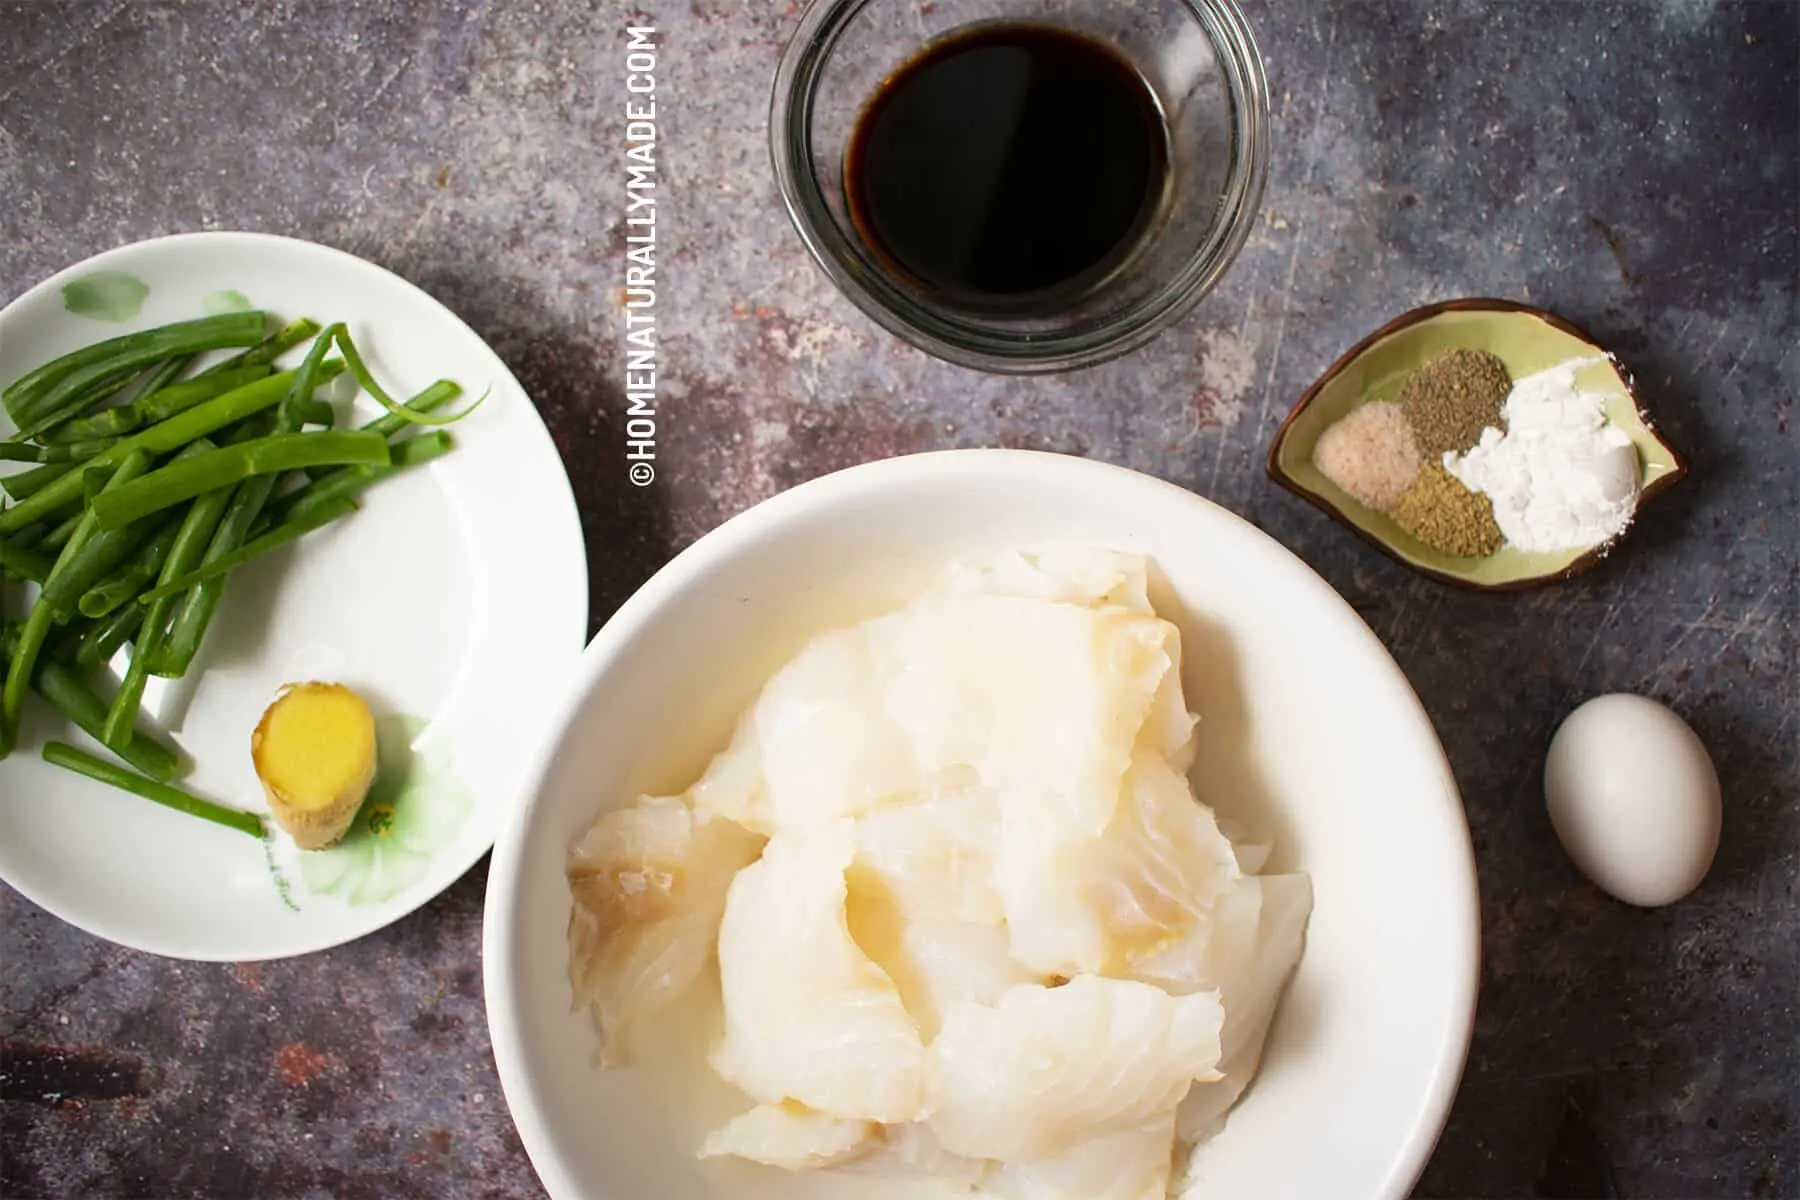 Cod fillet cut into thin slices for steaming